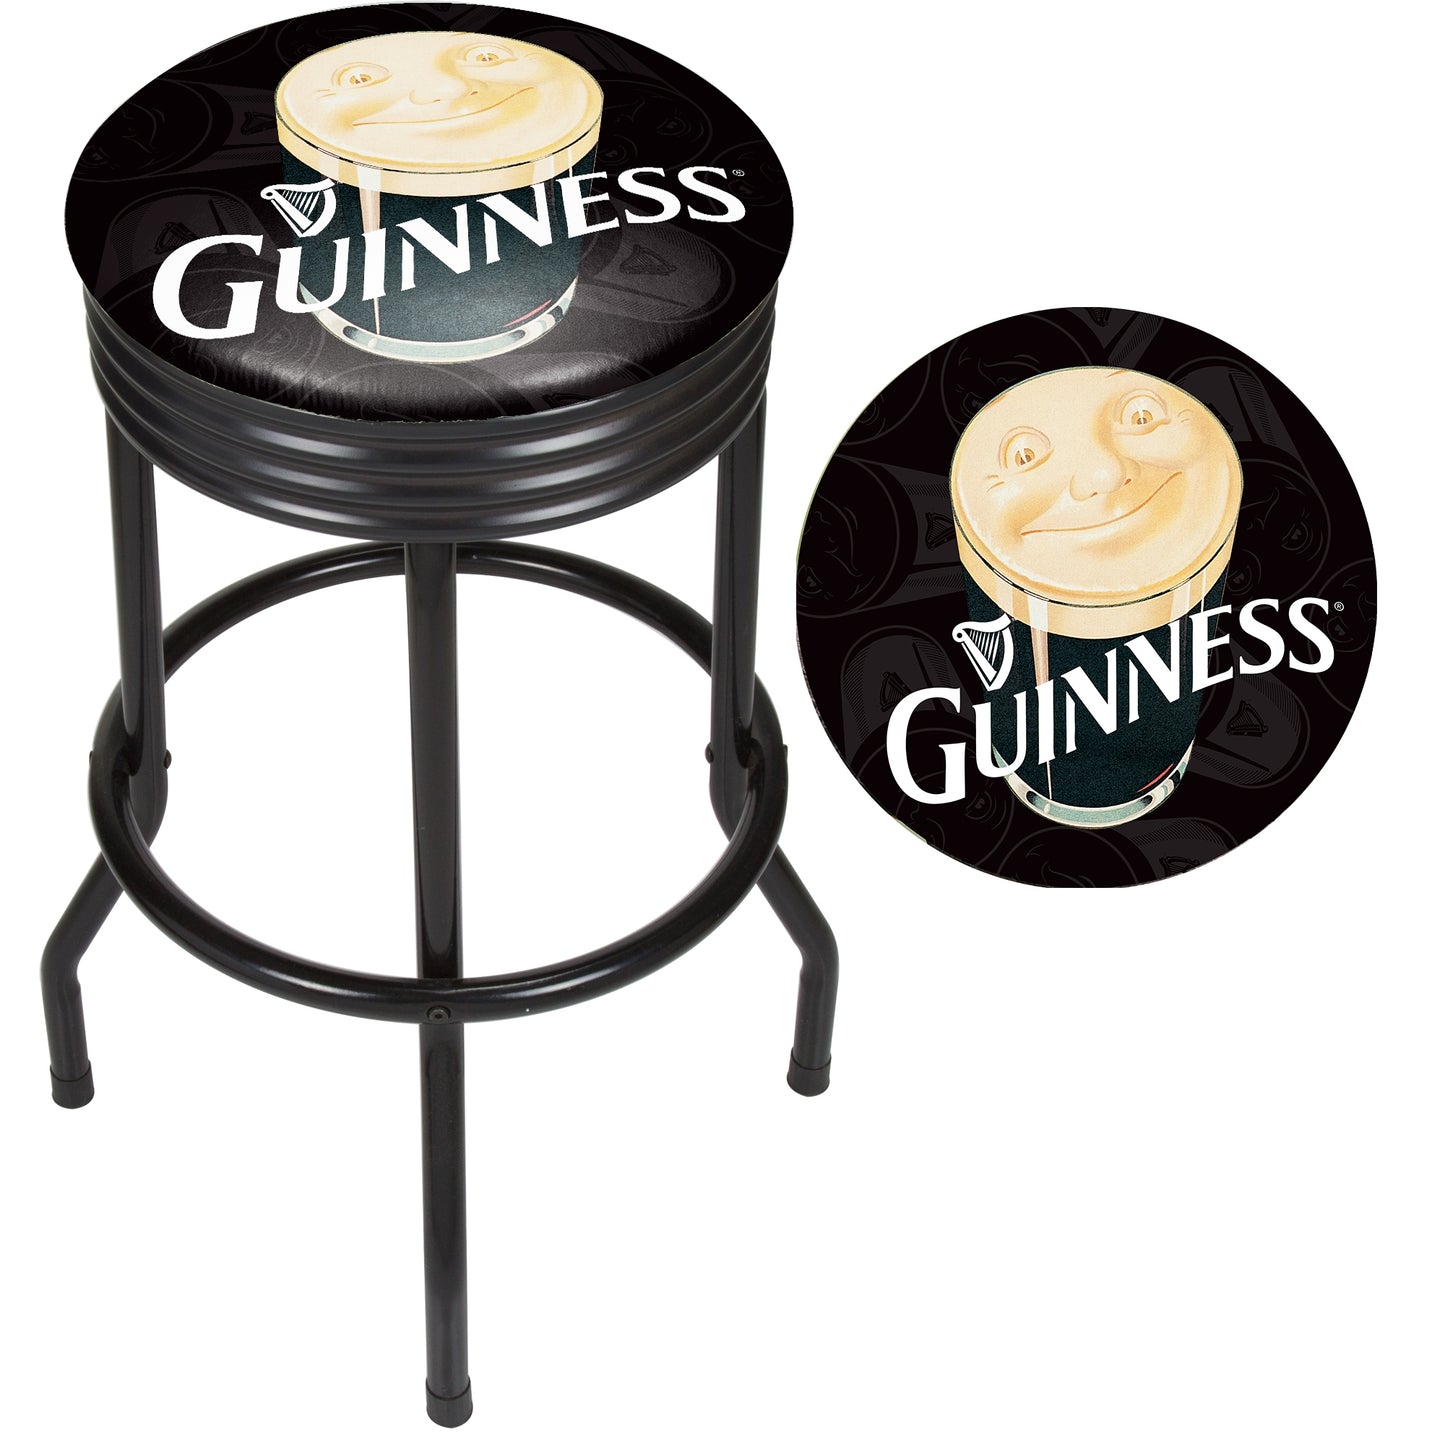 Guinness brand Guinness® Black Ribbed Bar Stool - Smiling Pint with a comfortable seat and guinness logo.